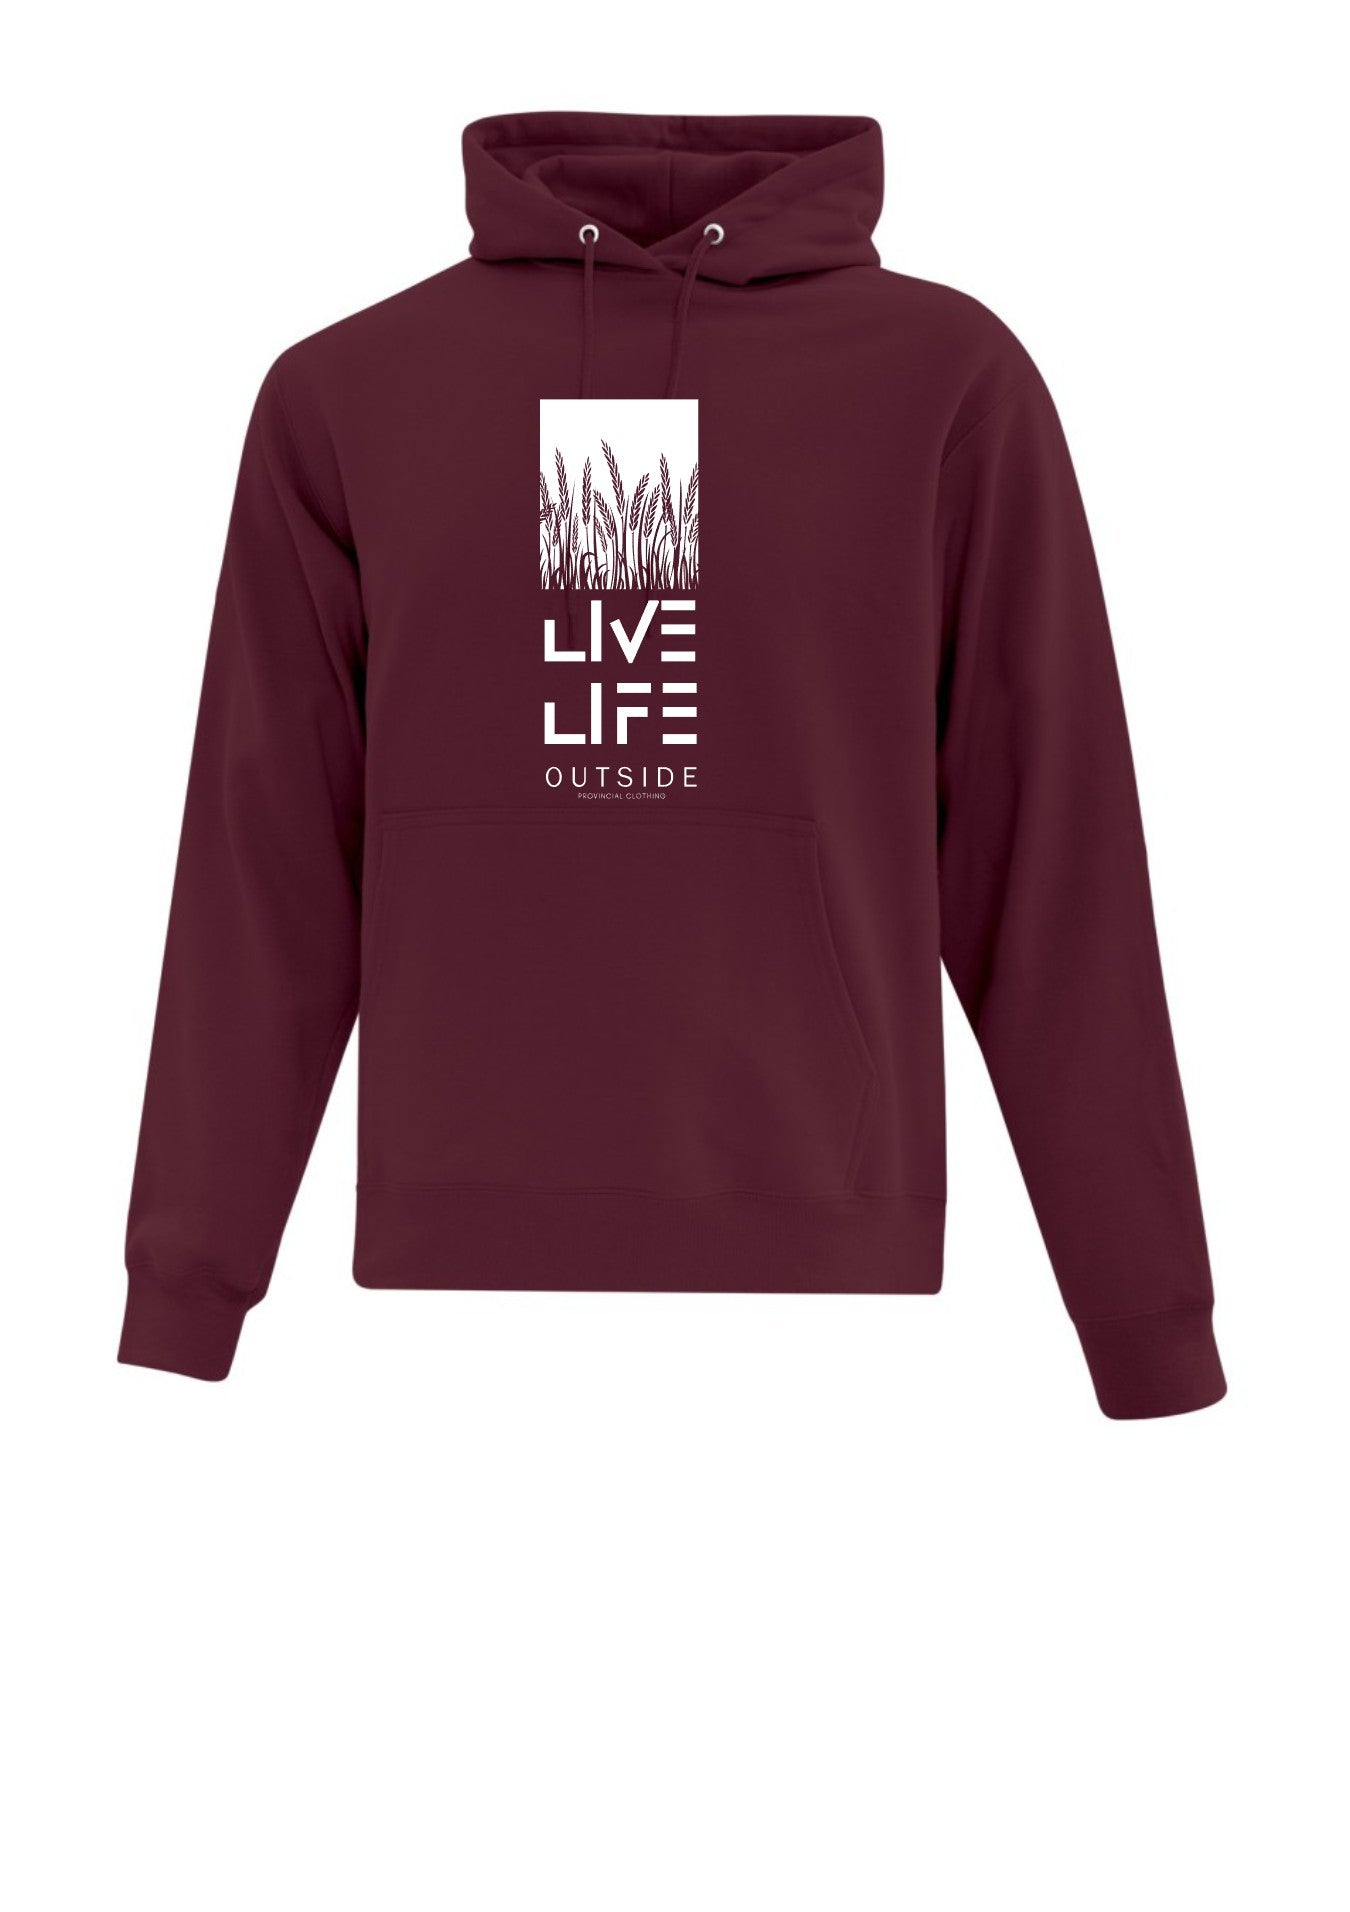 Live Life Outside- WHEAT Hoodie New* Clothing Provincial *Brand –